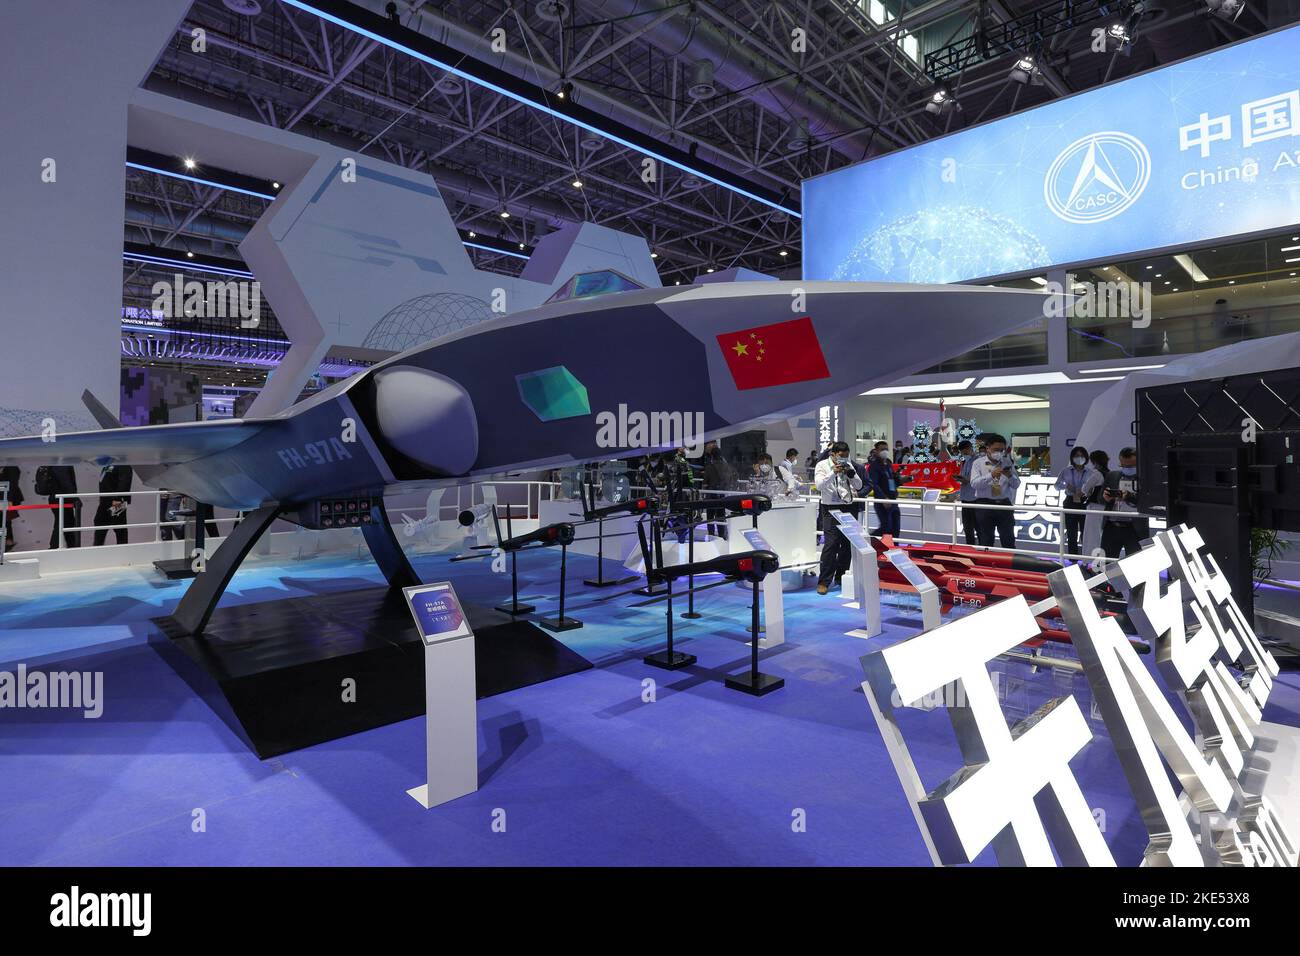 Zhuhai. 8th Nov, 2022. This photo taken on Nov. 8, 2022 shows a FH-97A unmanned aerial vehicle (UAV) displayed at the 14th China International Aviation and Aerospace Exhibition, also known as Airshow China, in the port city of Zhuhai, south China's Guangdong Province. A range of China's homegrown unmanned aerial vehicles (UAVs) and anti-drone system are showcased at the 14th Airshow China. Credit: Liu Dawei/Xinhua/Alamy Live News Stock Photo